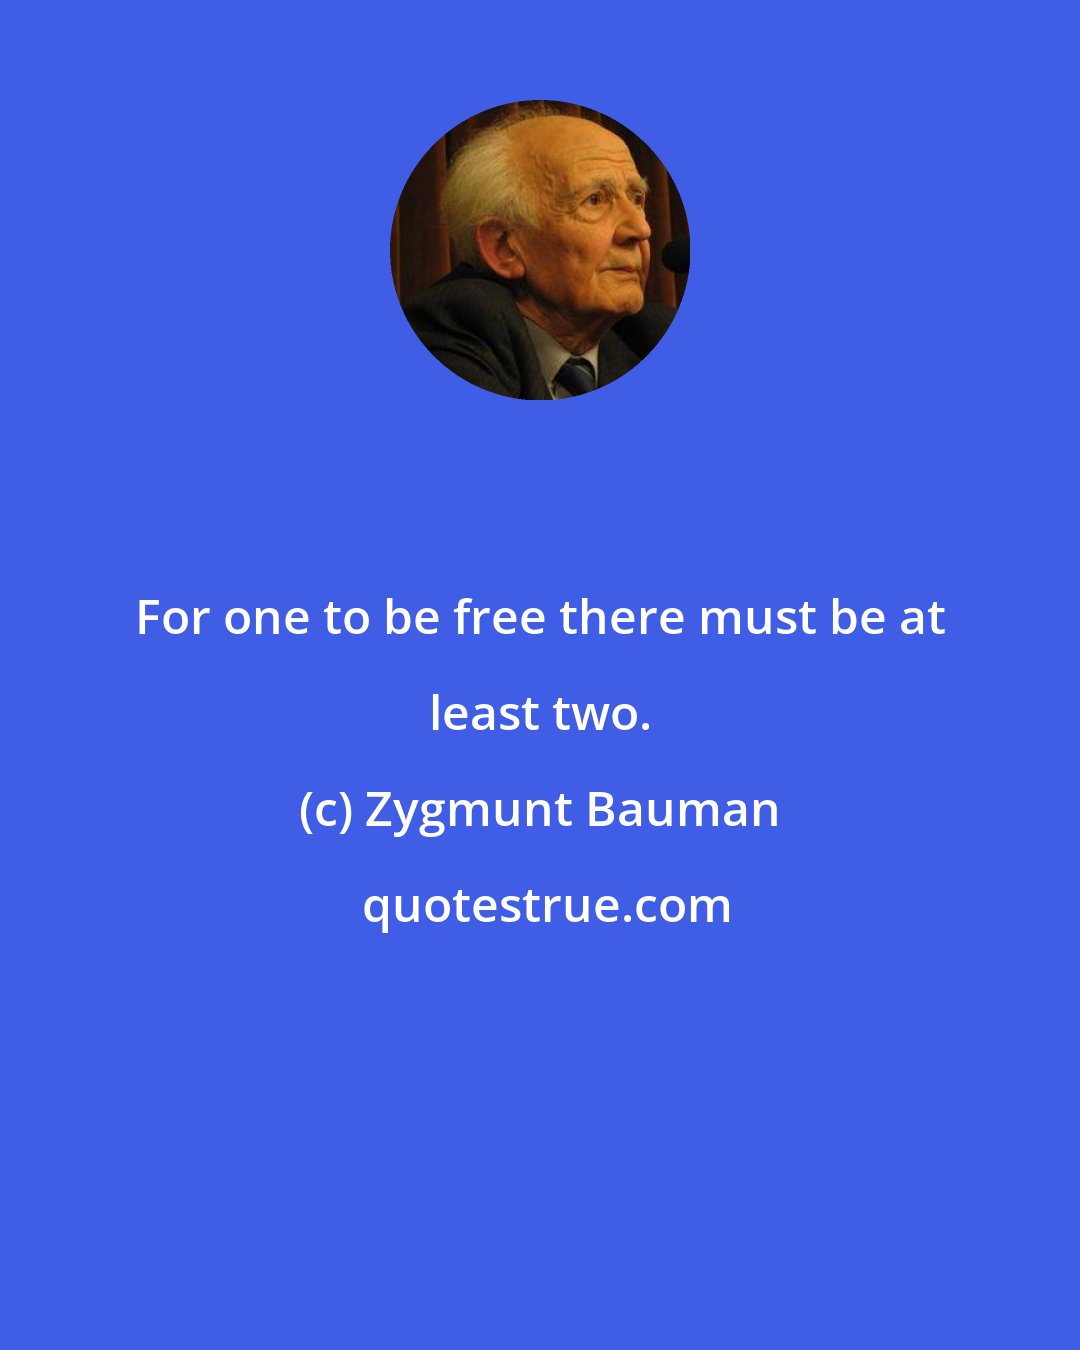 Zygmunt Bauman: For one to be free there must be at least two.